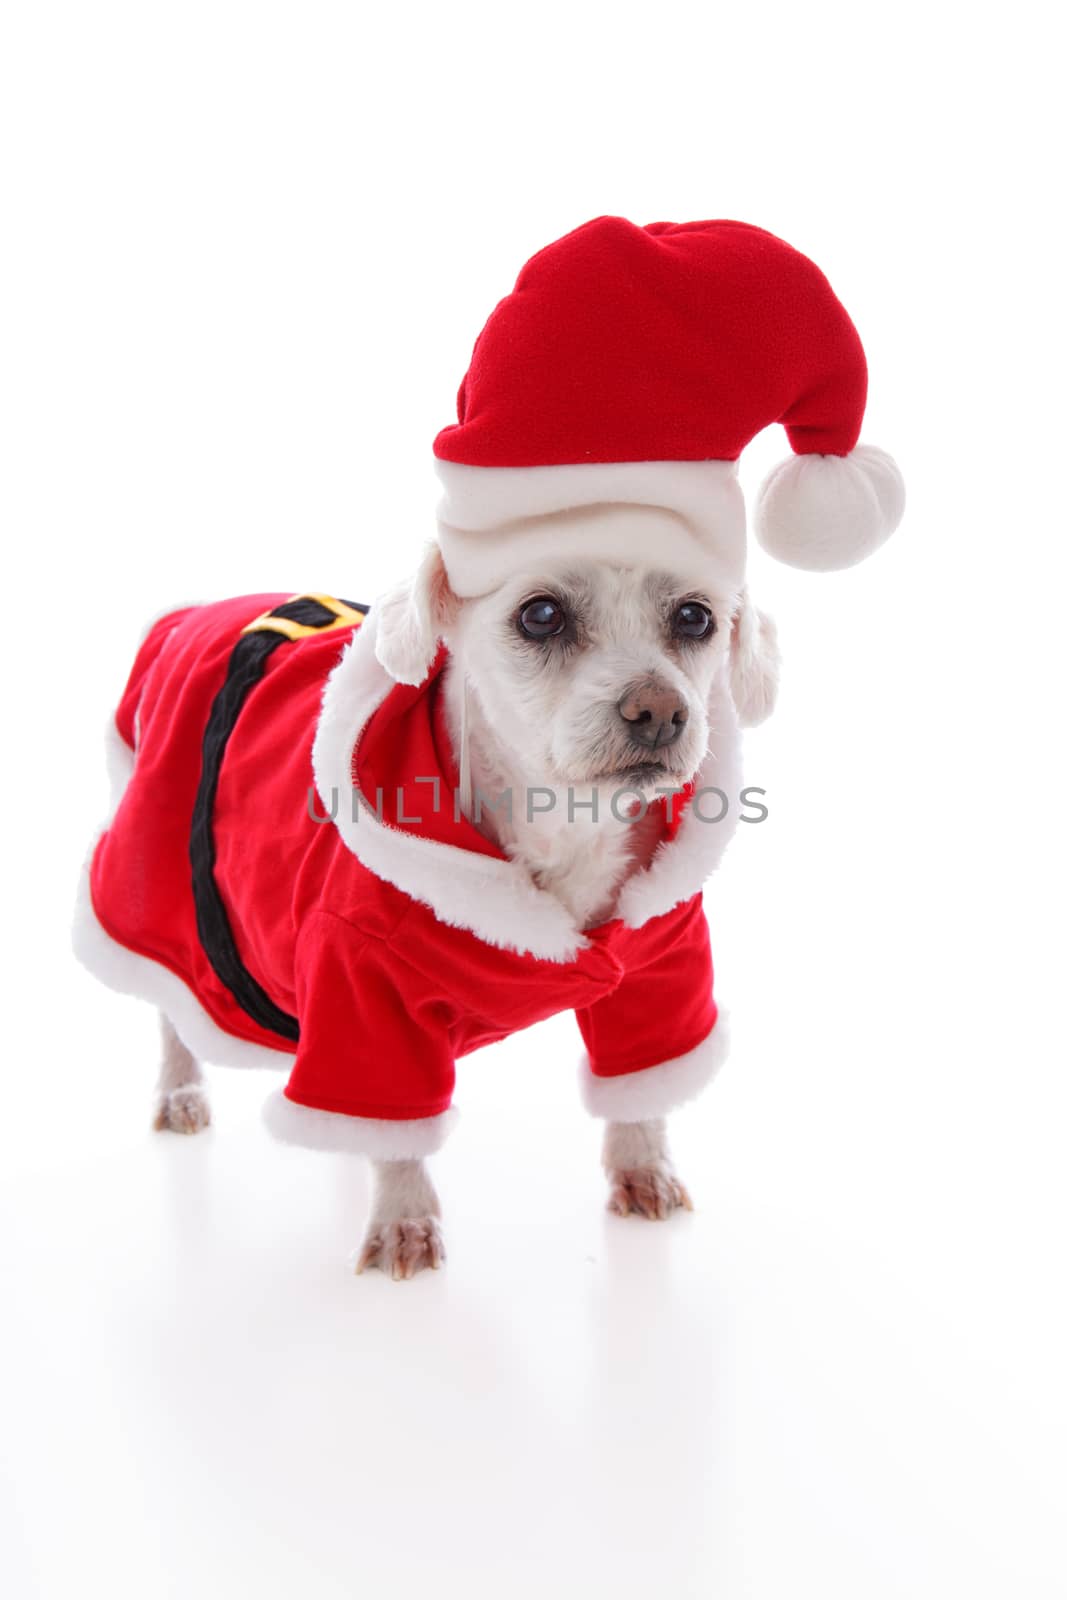 Small white dog wears a red and white santa claus costume and hat at Christmas. White background.